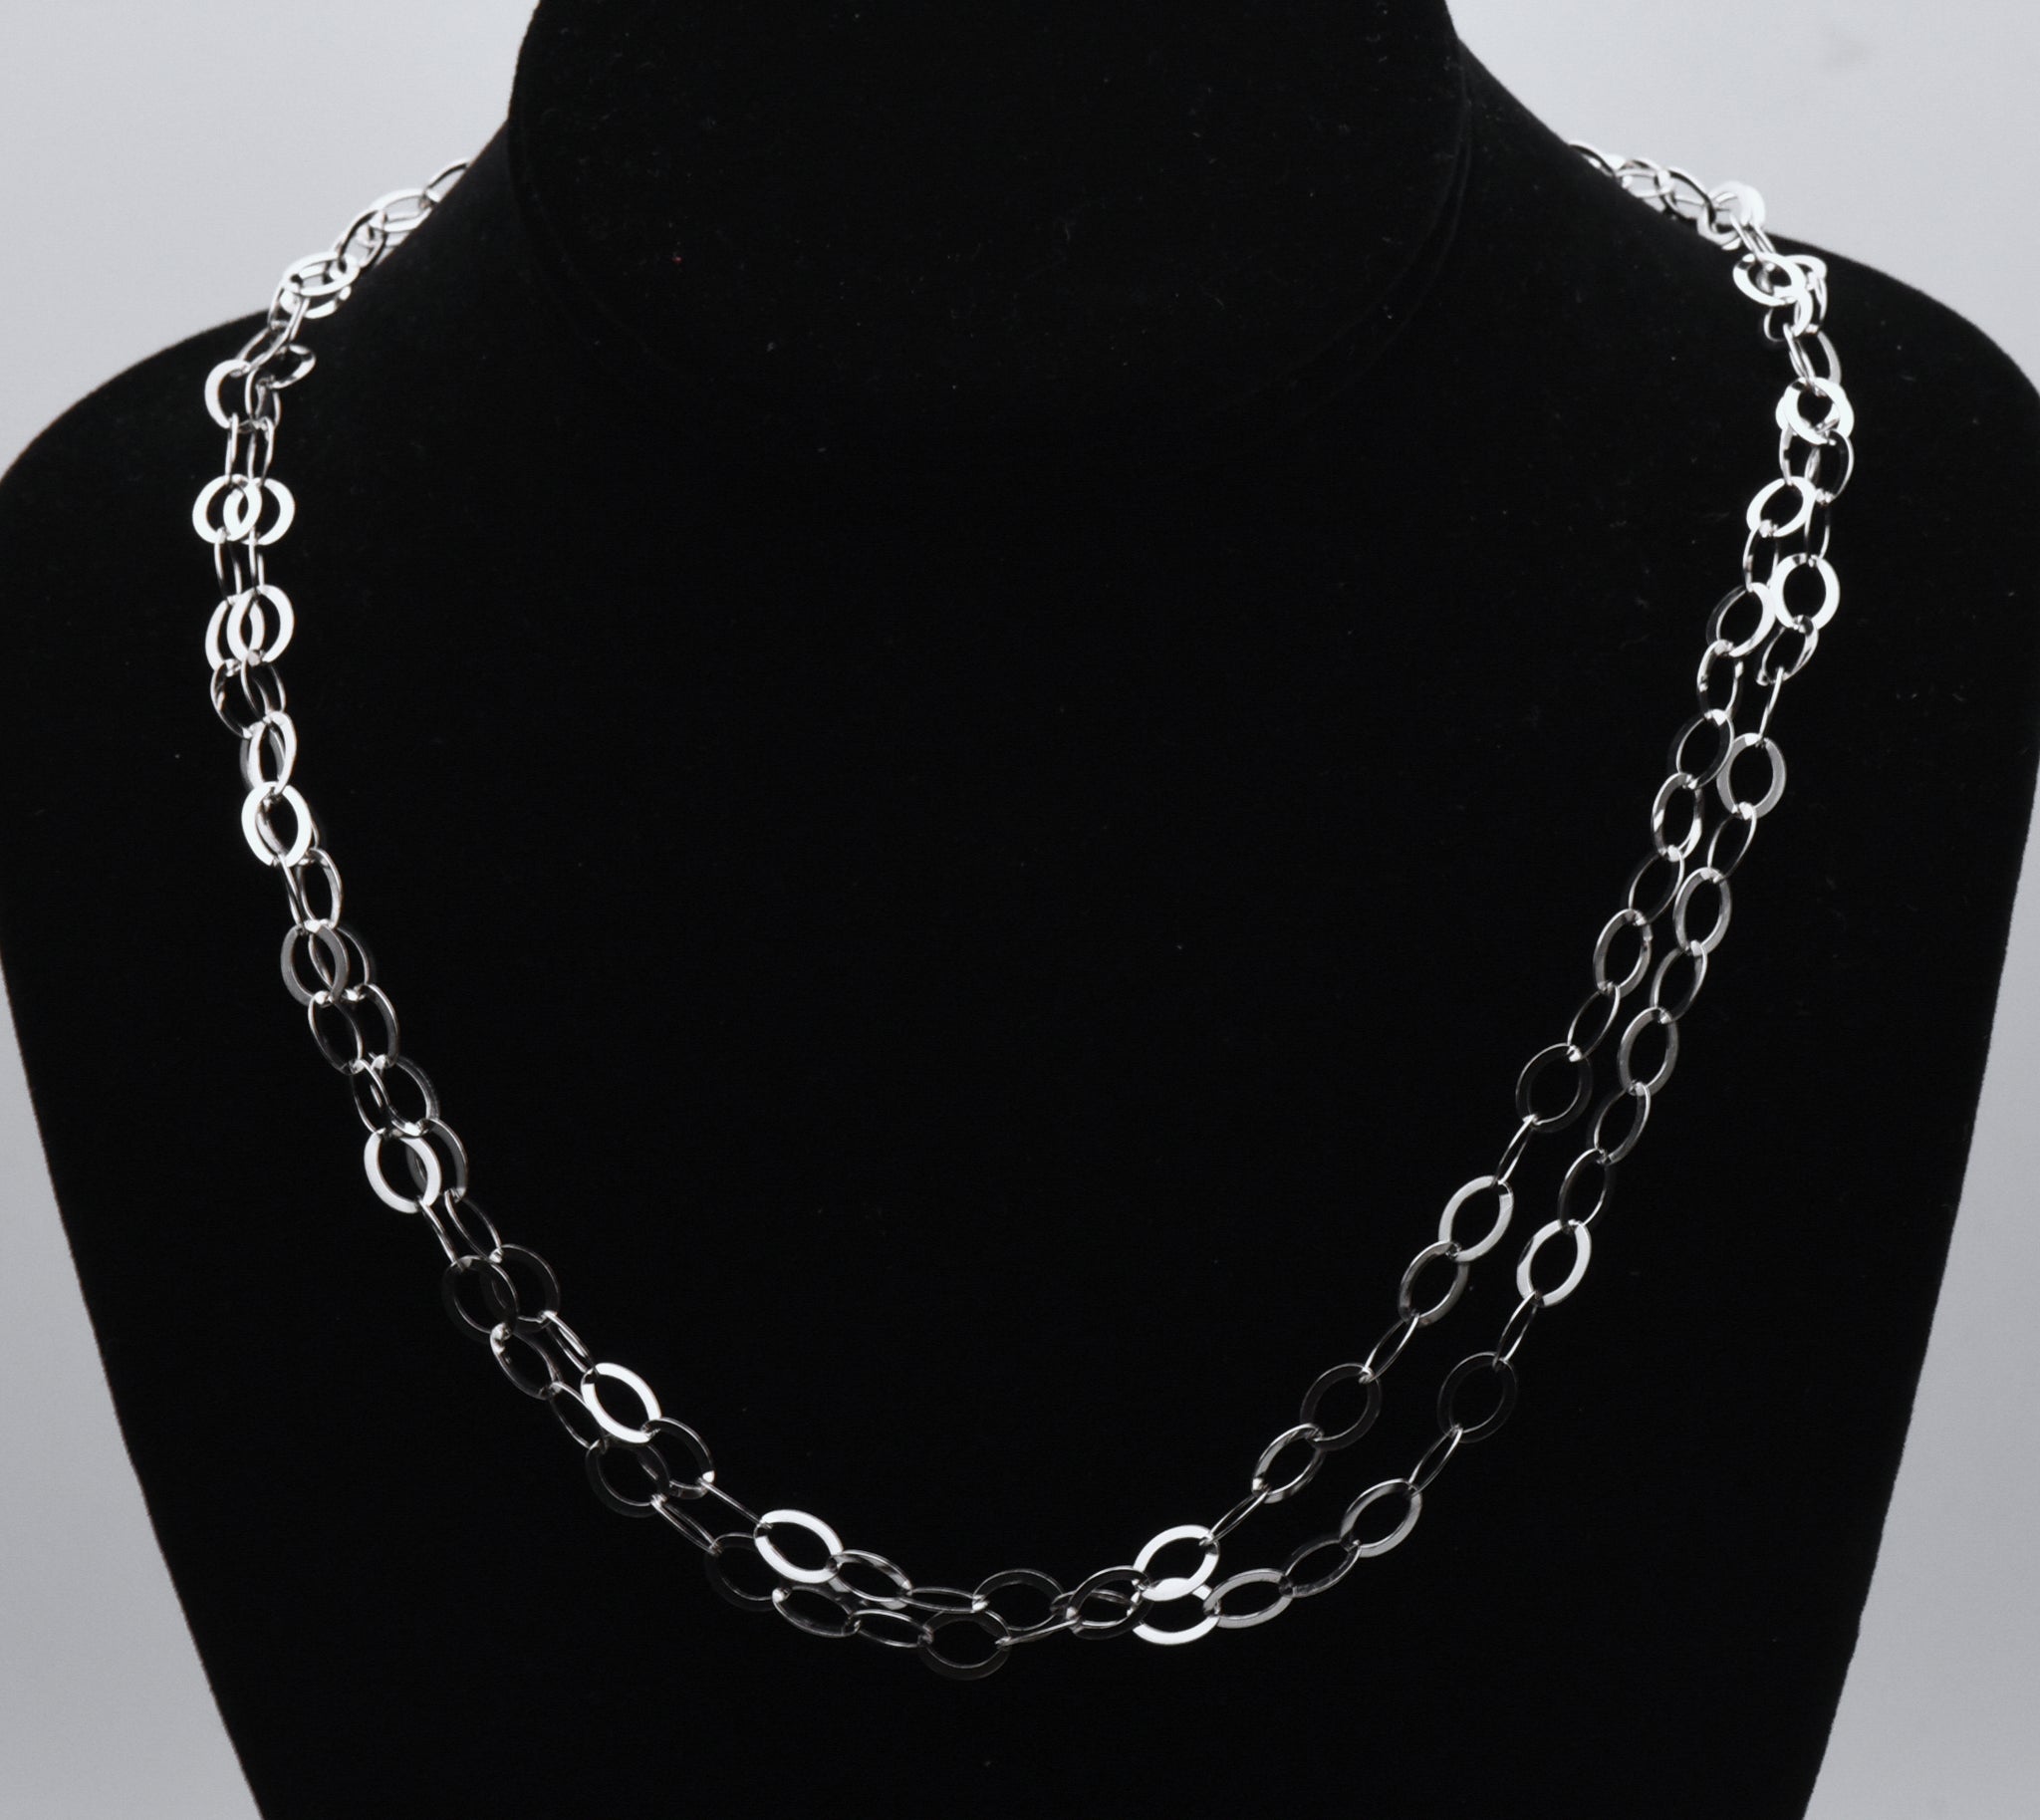 Vintage Italian Sterling Silver Chain Necklace - 40"